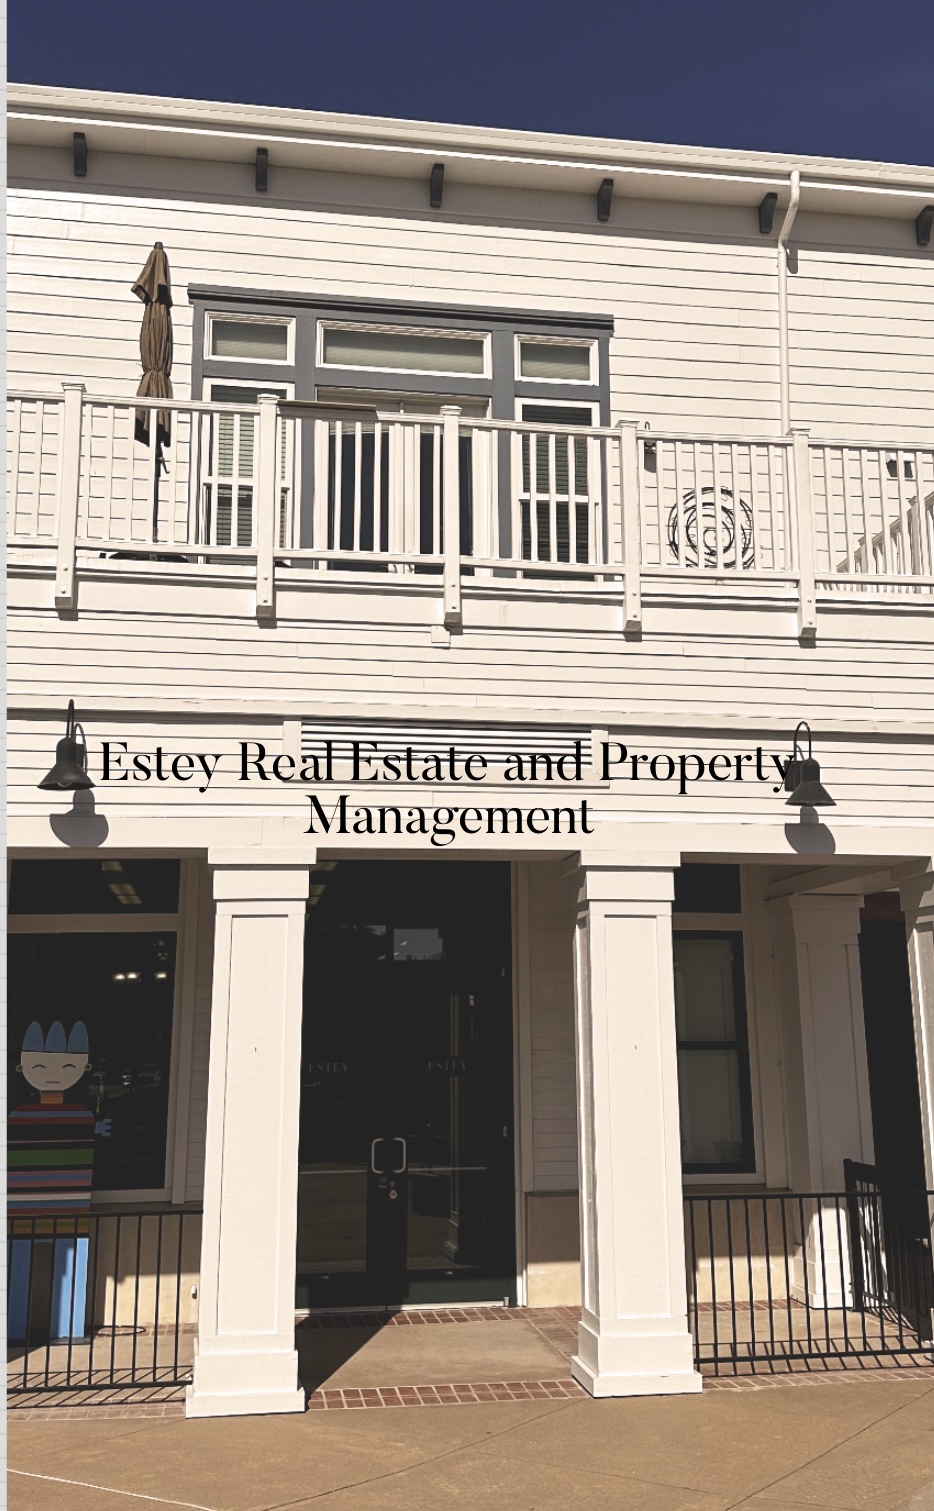 Estey Real Estate and Property Management | 216 1st St, Benicia, CA 94510 | Phone: (707) 745-0924